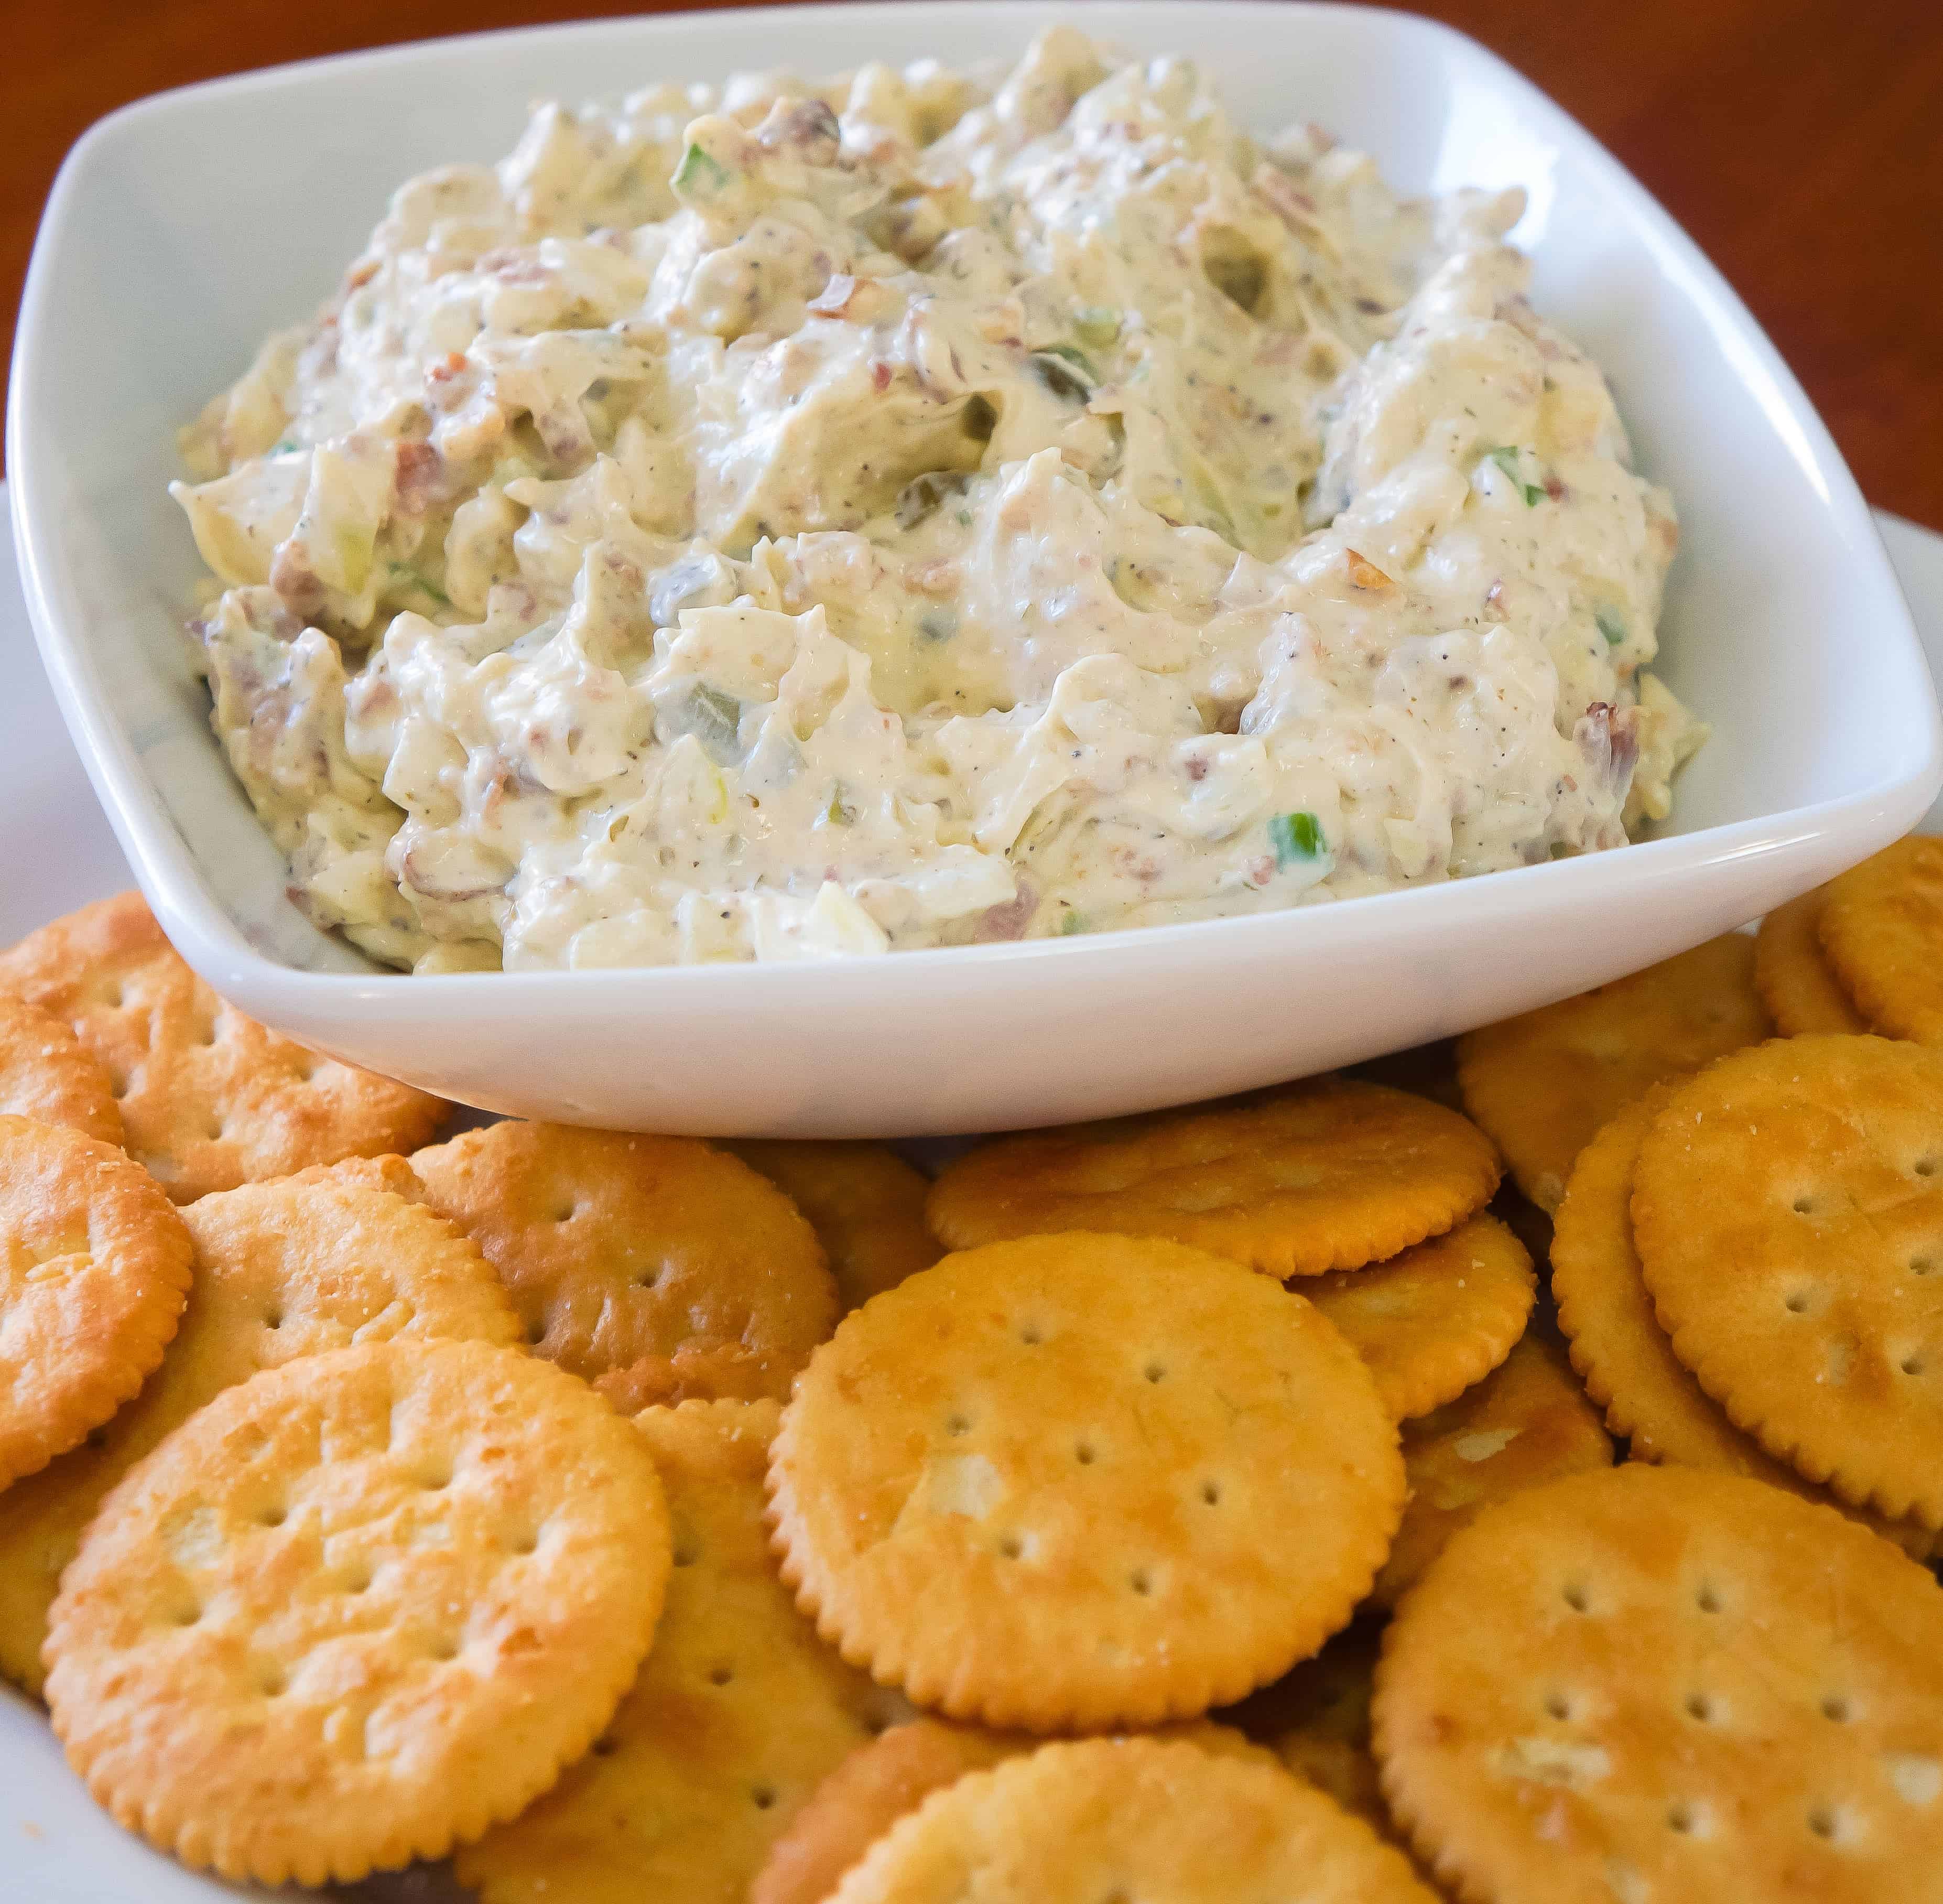 Bacon Onion Cream Cheese Dip for Crackers